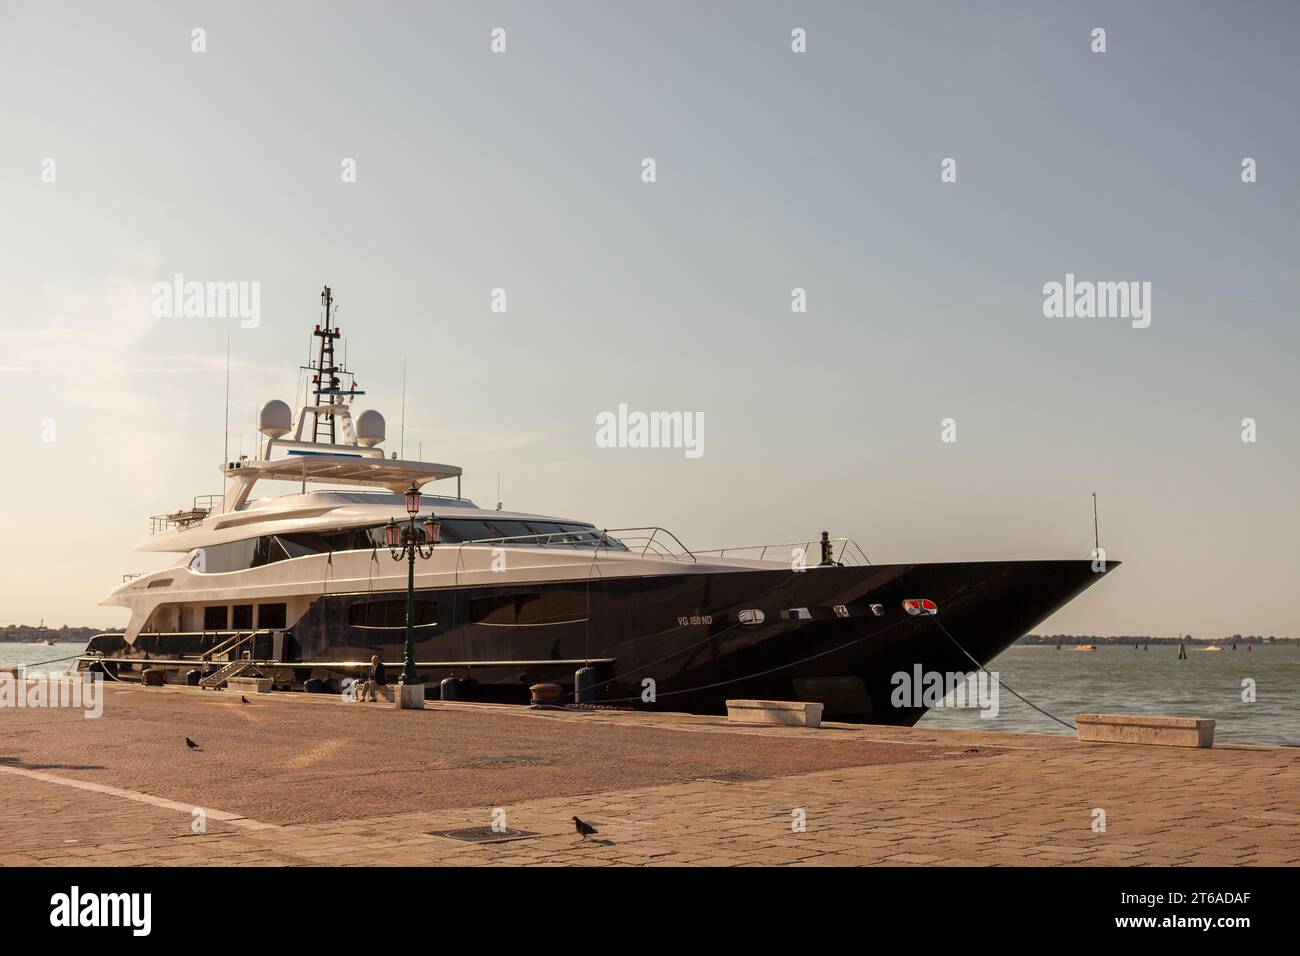 Yatch moored at a quay in Venice, Italy. District of Castello. Stock Photo